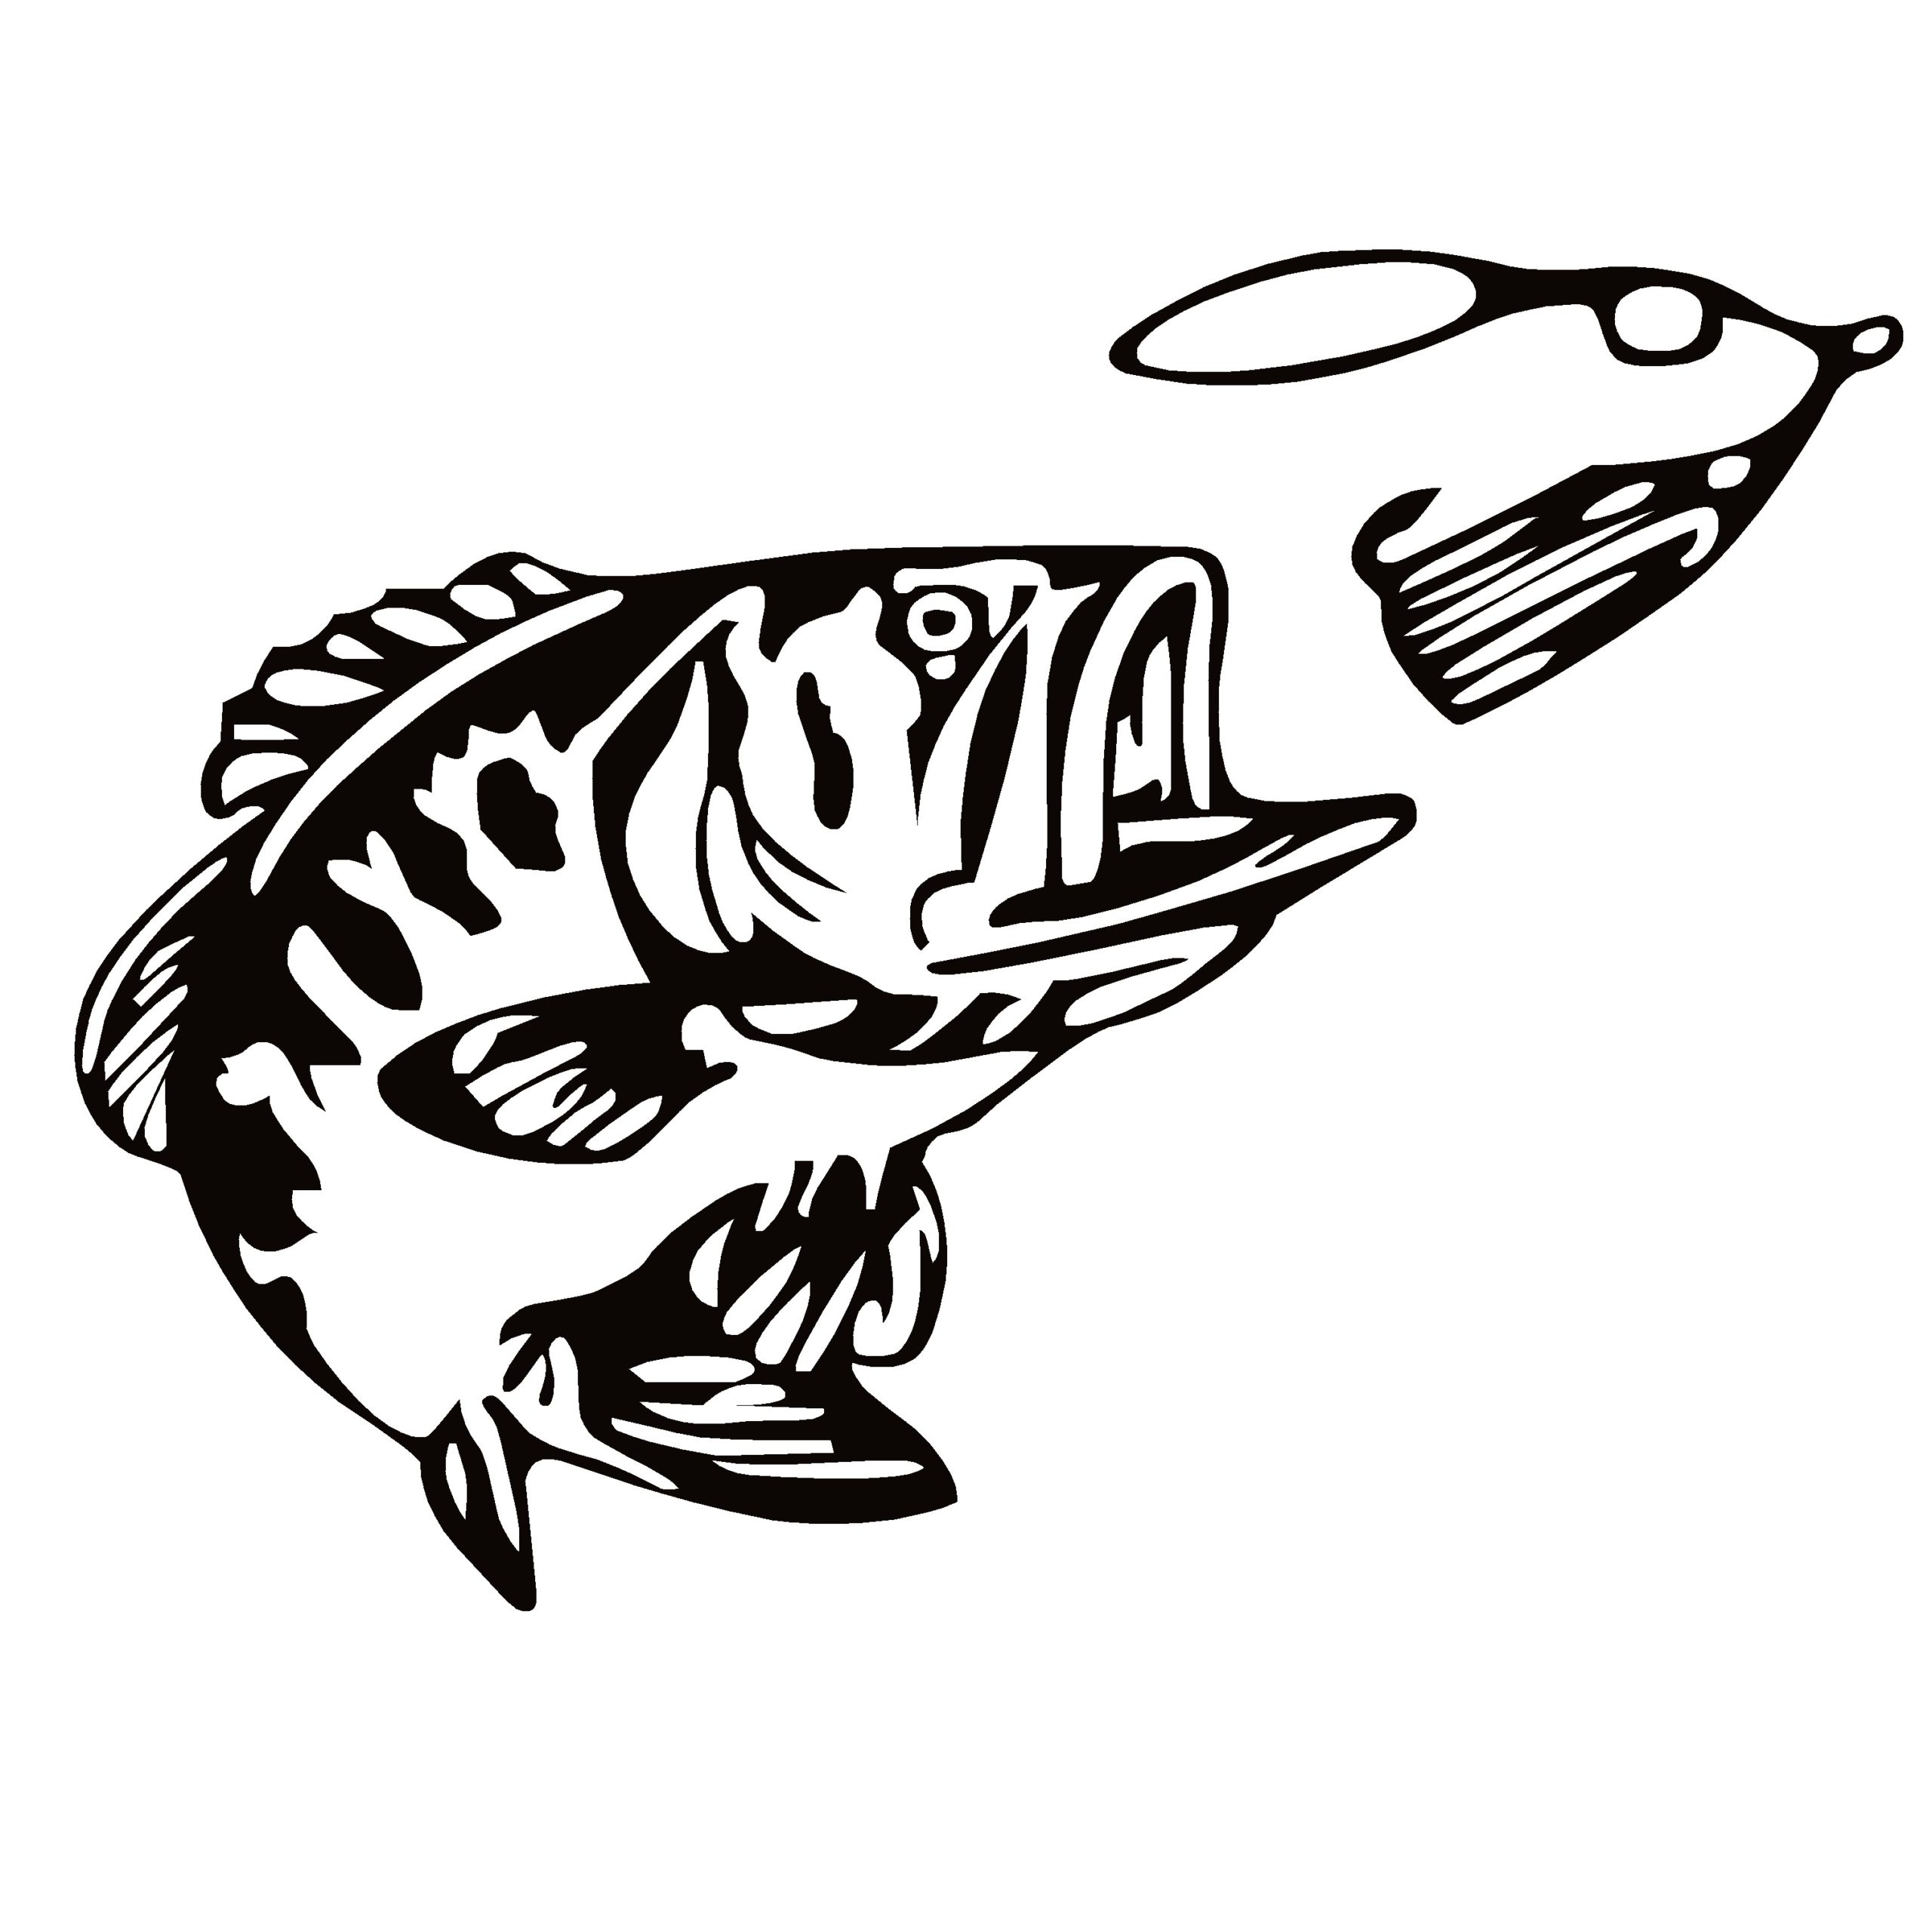 Largemouth Bass Fishing Stickers for Sale